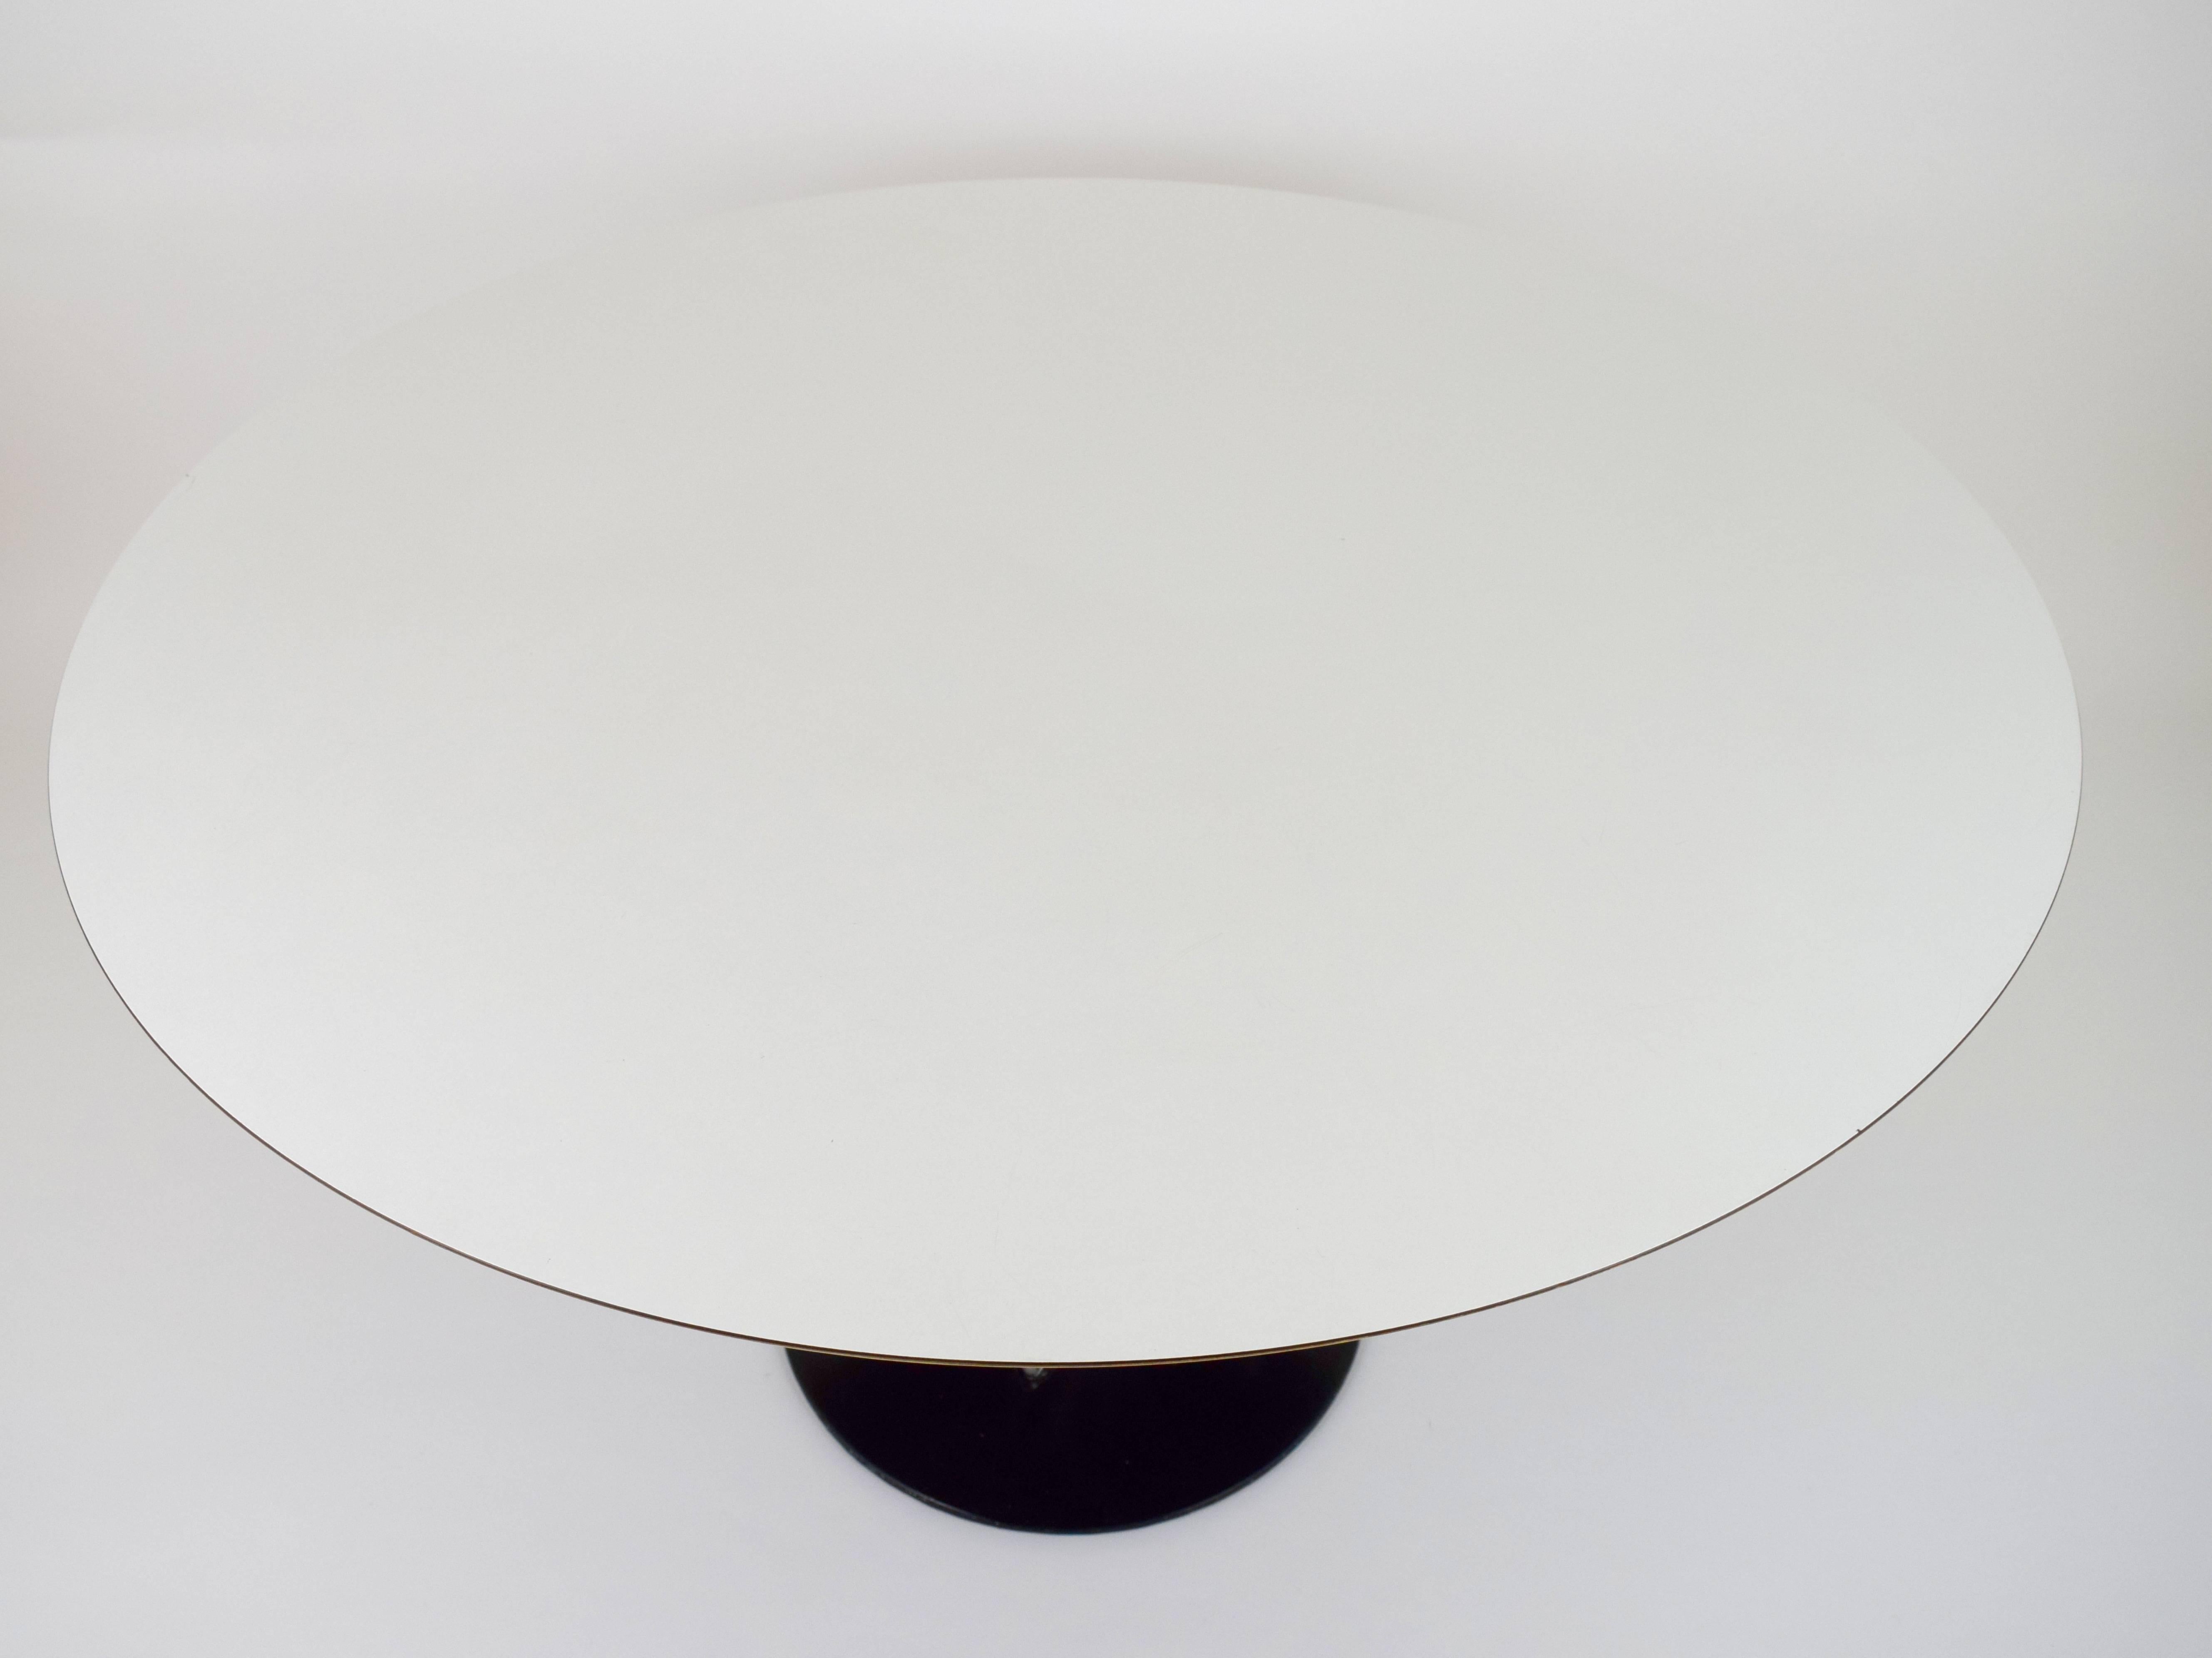 Iconic cyclone dining table by Isamu Noguchi for Knoll. Earlier production piece with rare 47.5